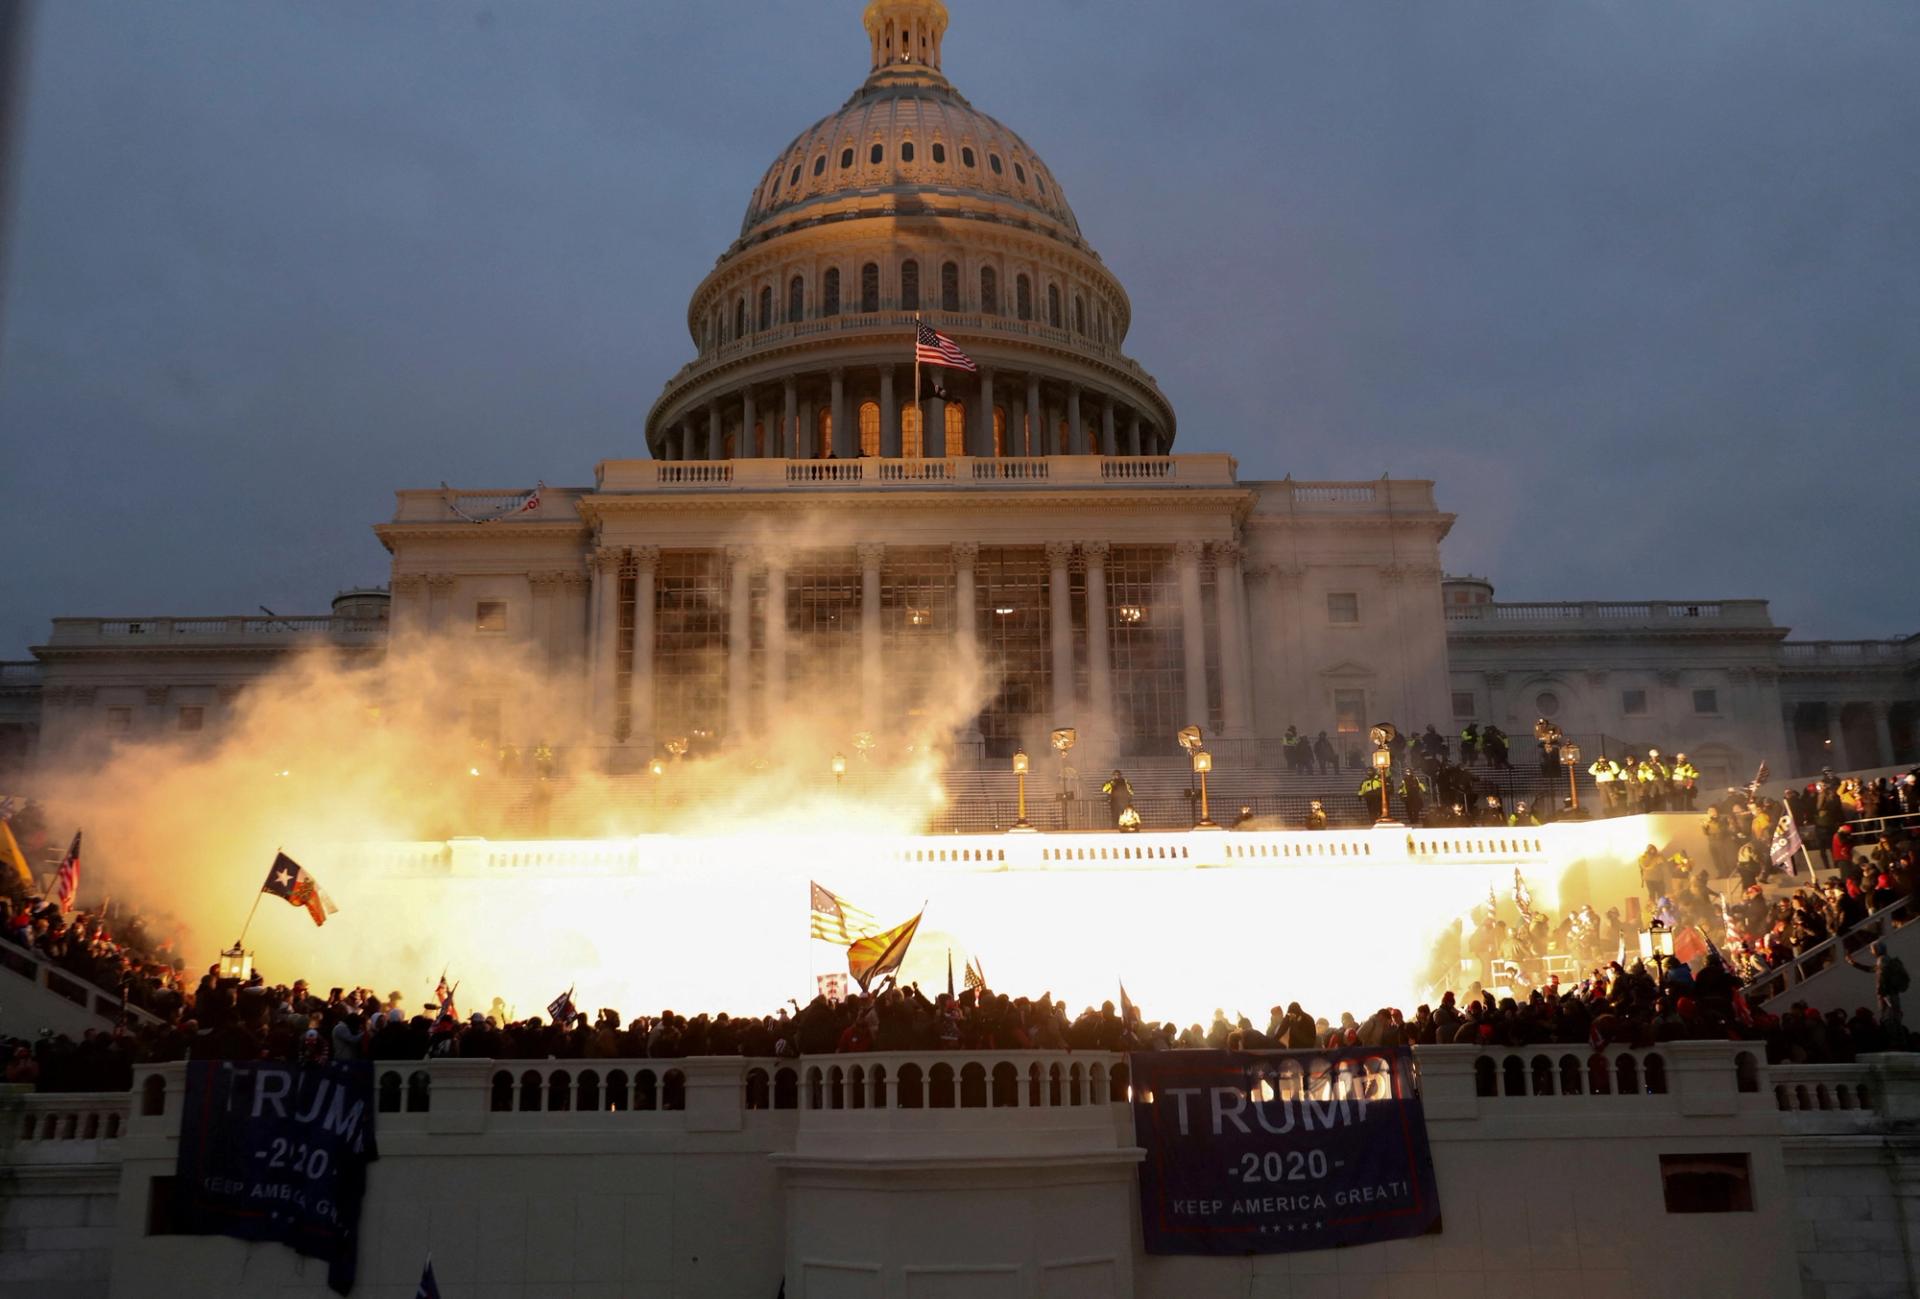 An explosion caused by a police munition is seen while supporters of U.S. President Donald Trump gather in front of the U.S. Capitol Building in Washington, D.C., on Jan. 6, 2021. 